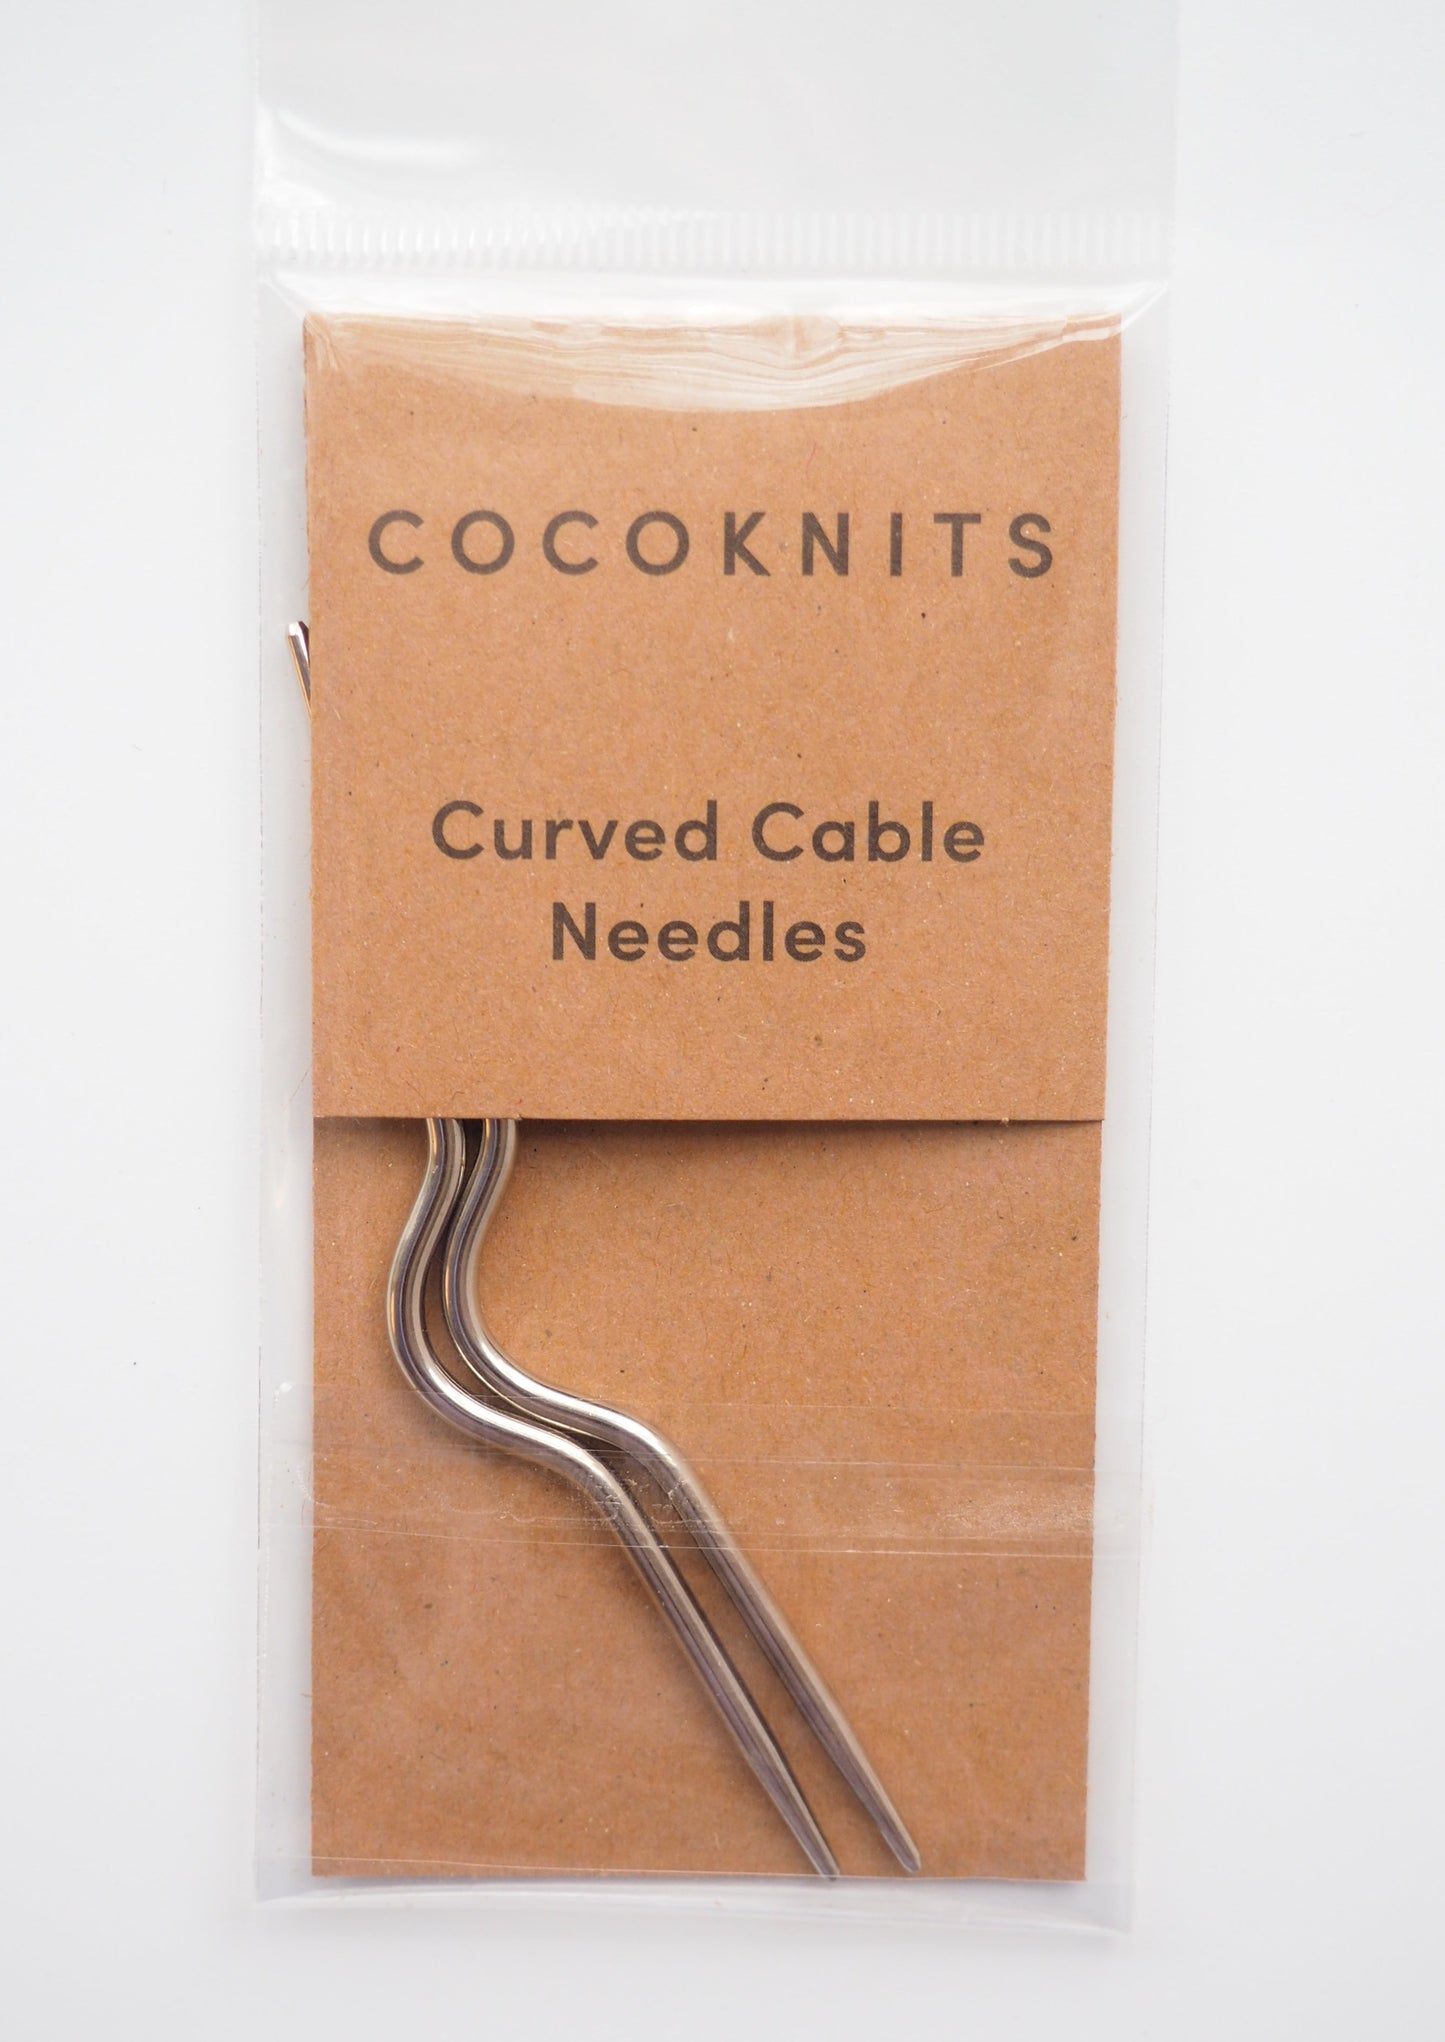 Cocoknits: Curved Cable Needles